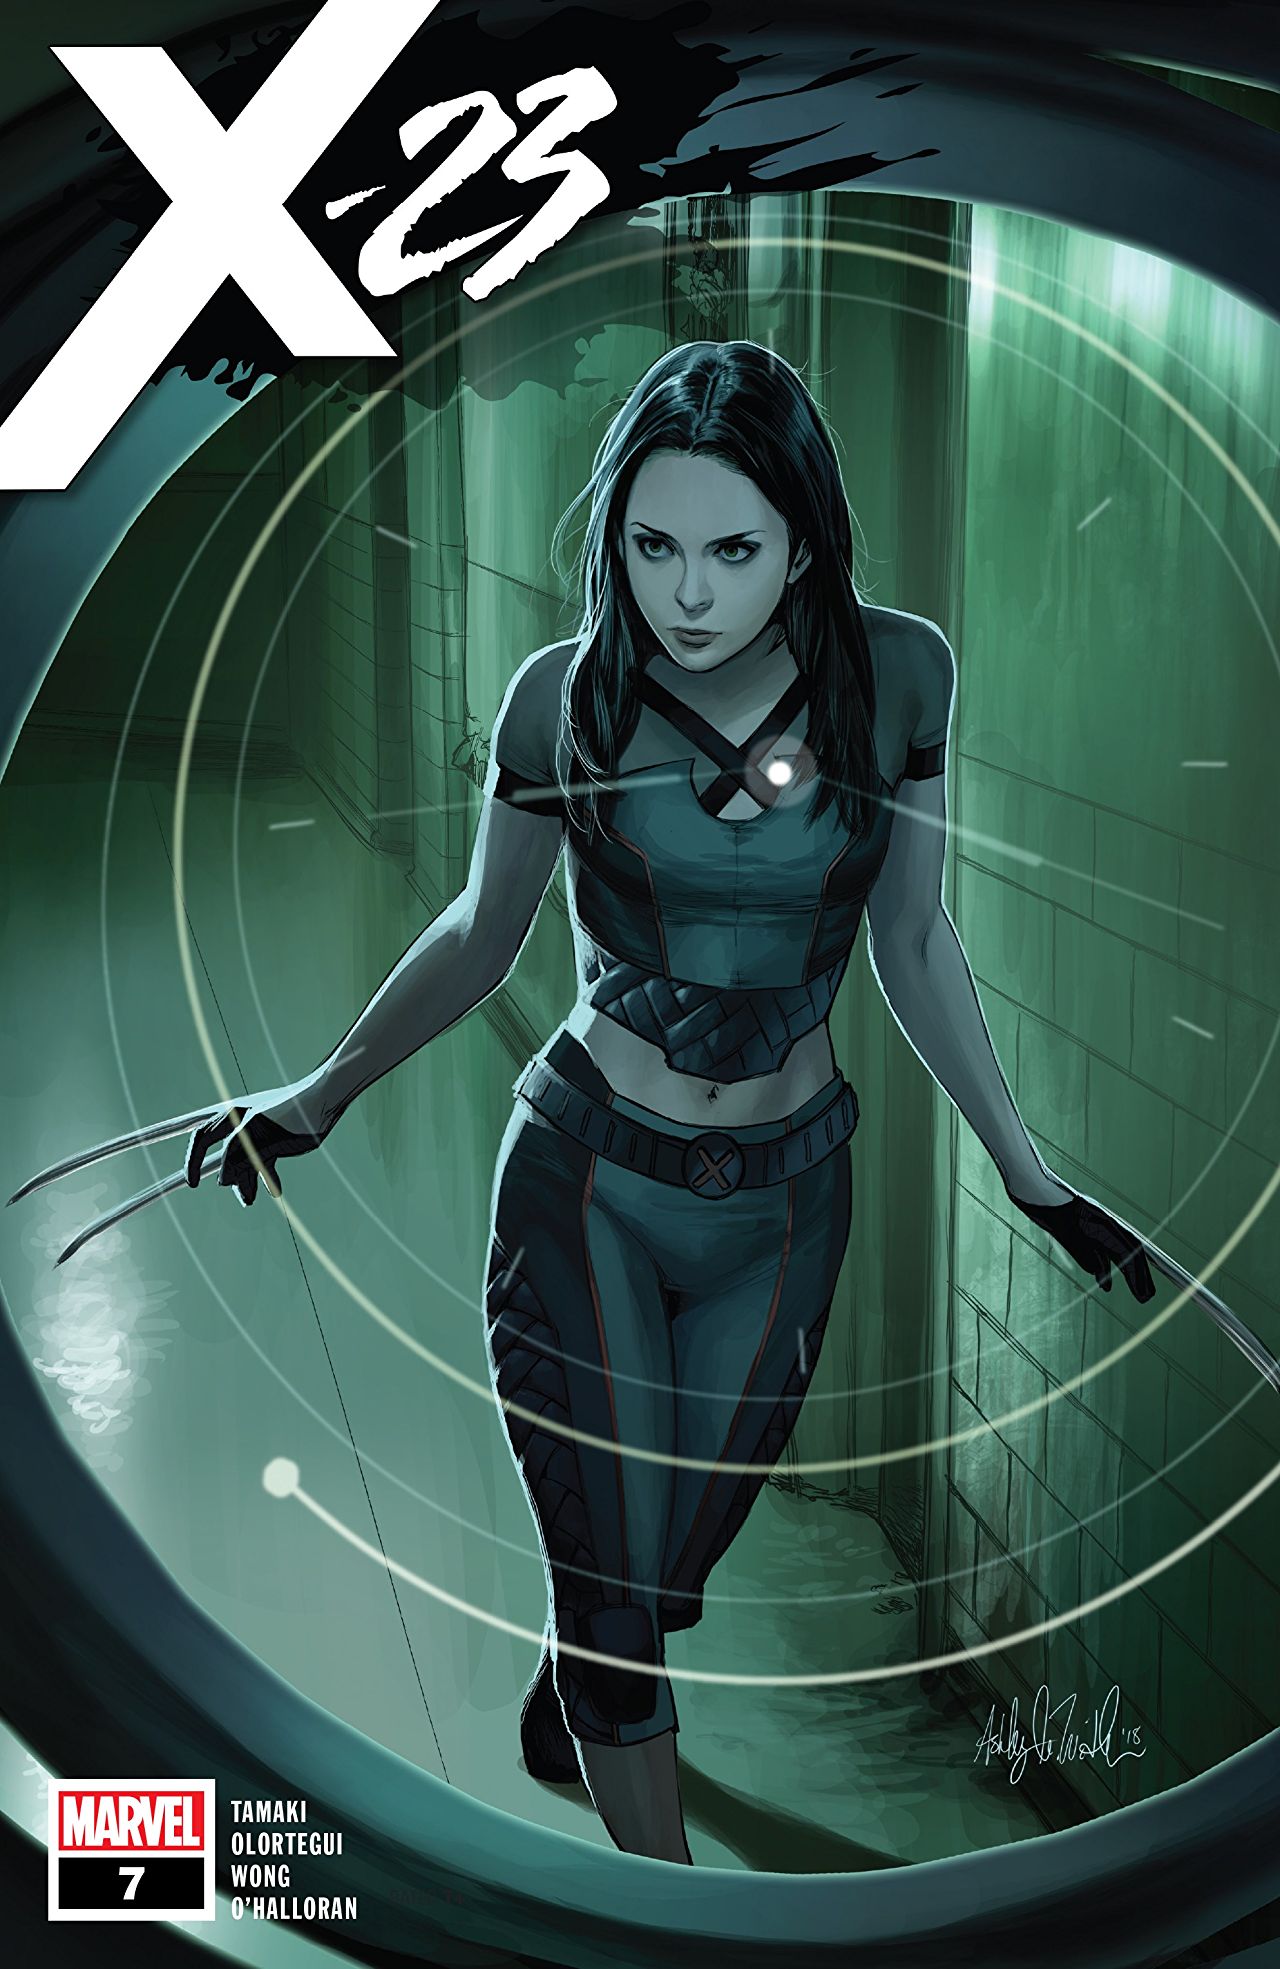 Marvel Preview: X-23 #7